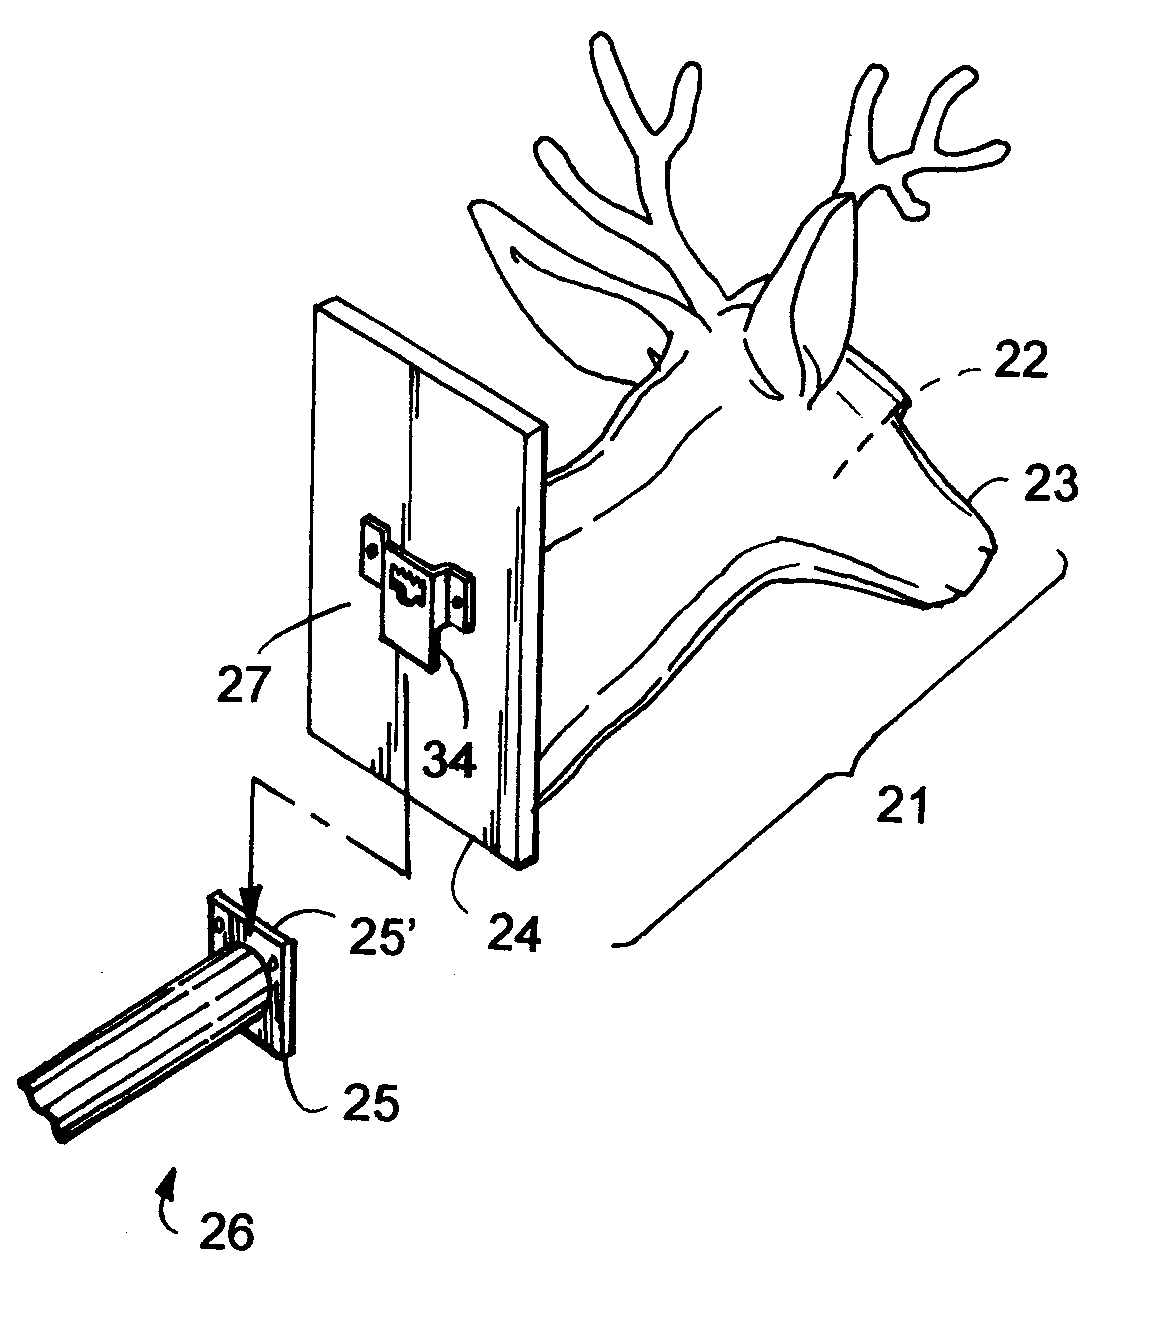 Taxidermy hanger system and method